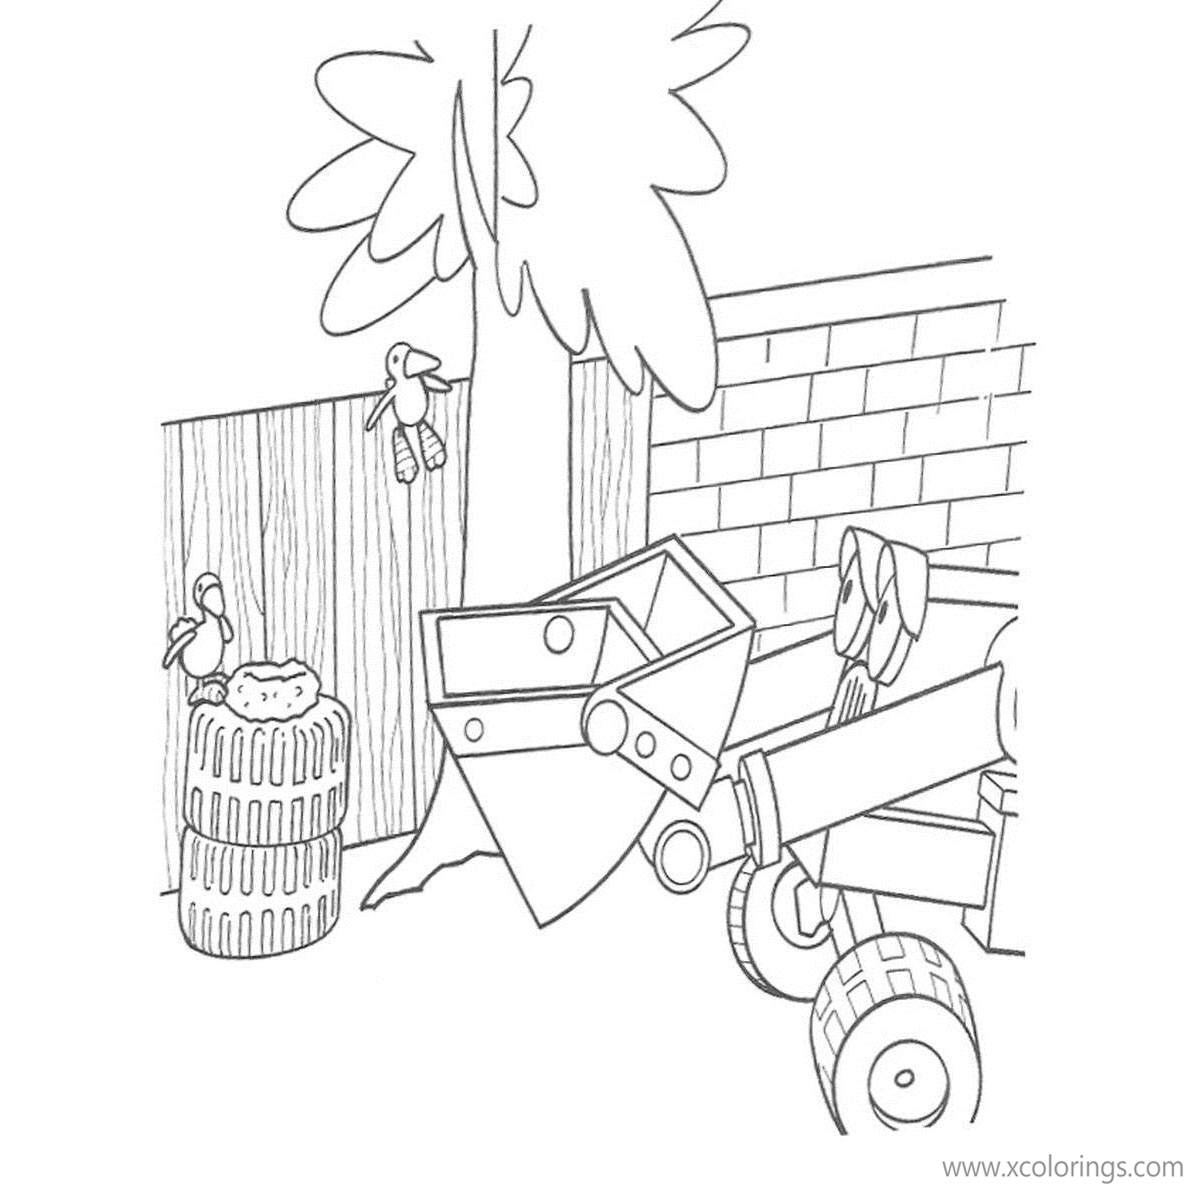 Free Bob The Builder Coloring Pages Scoop and Birds printable